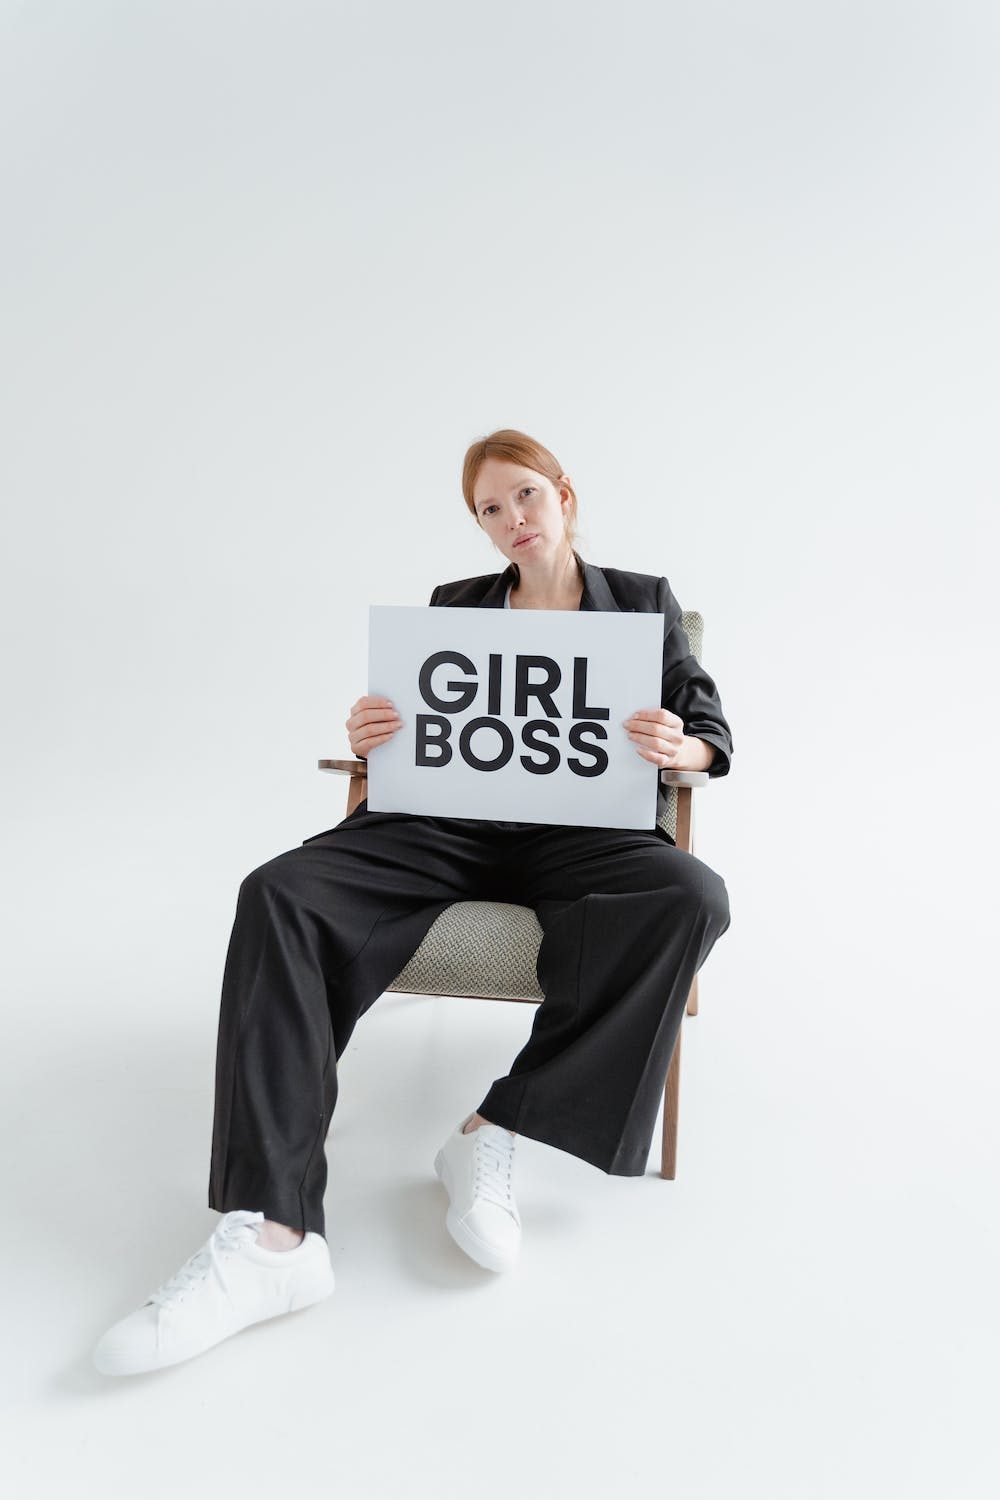 Confident girl in business suit holding a sign that says "girl boss"